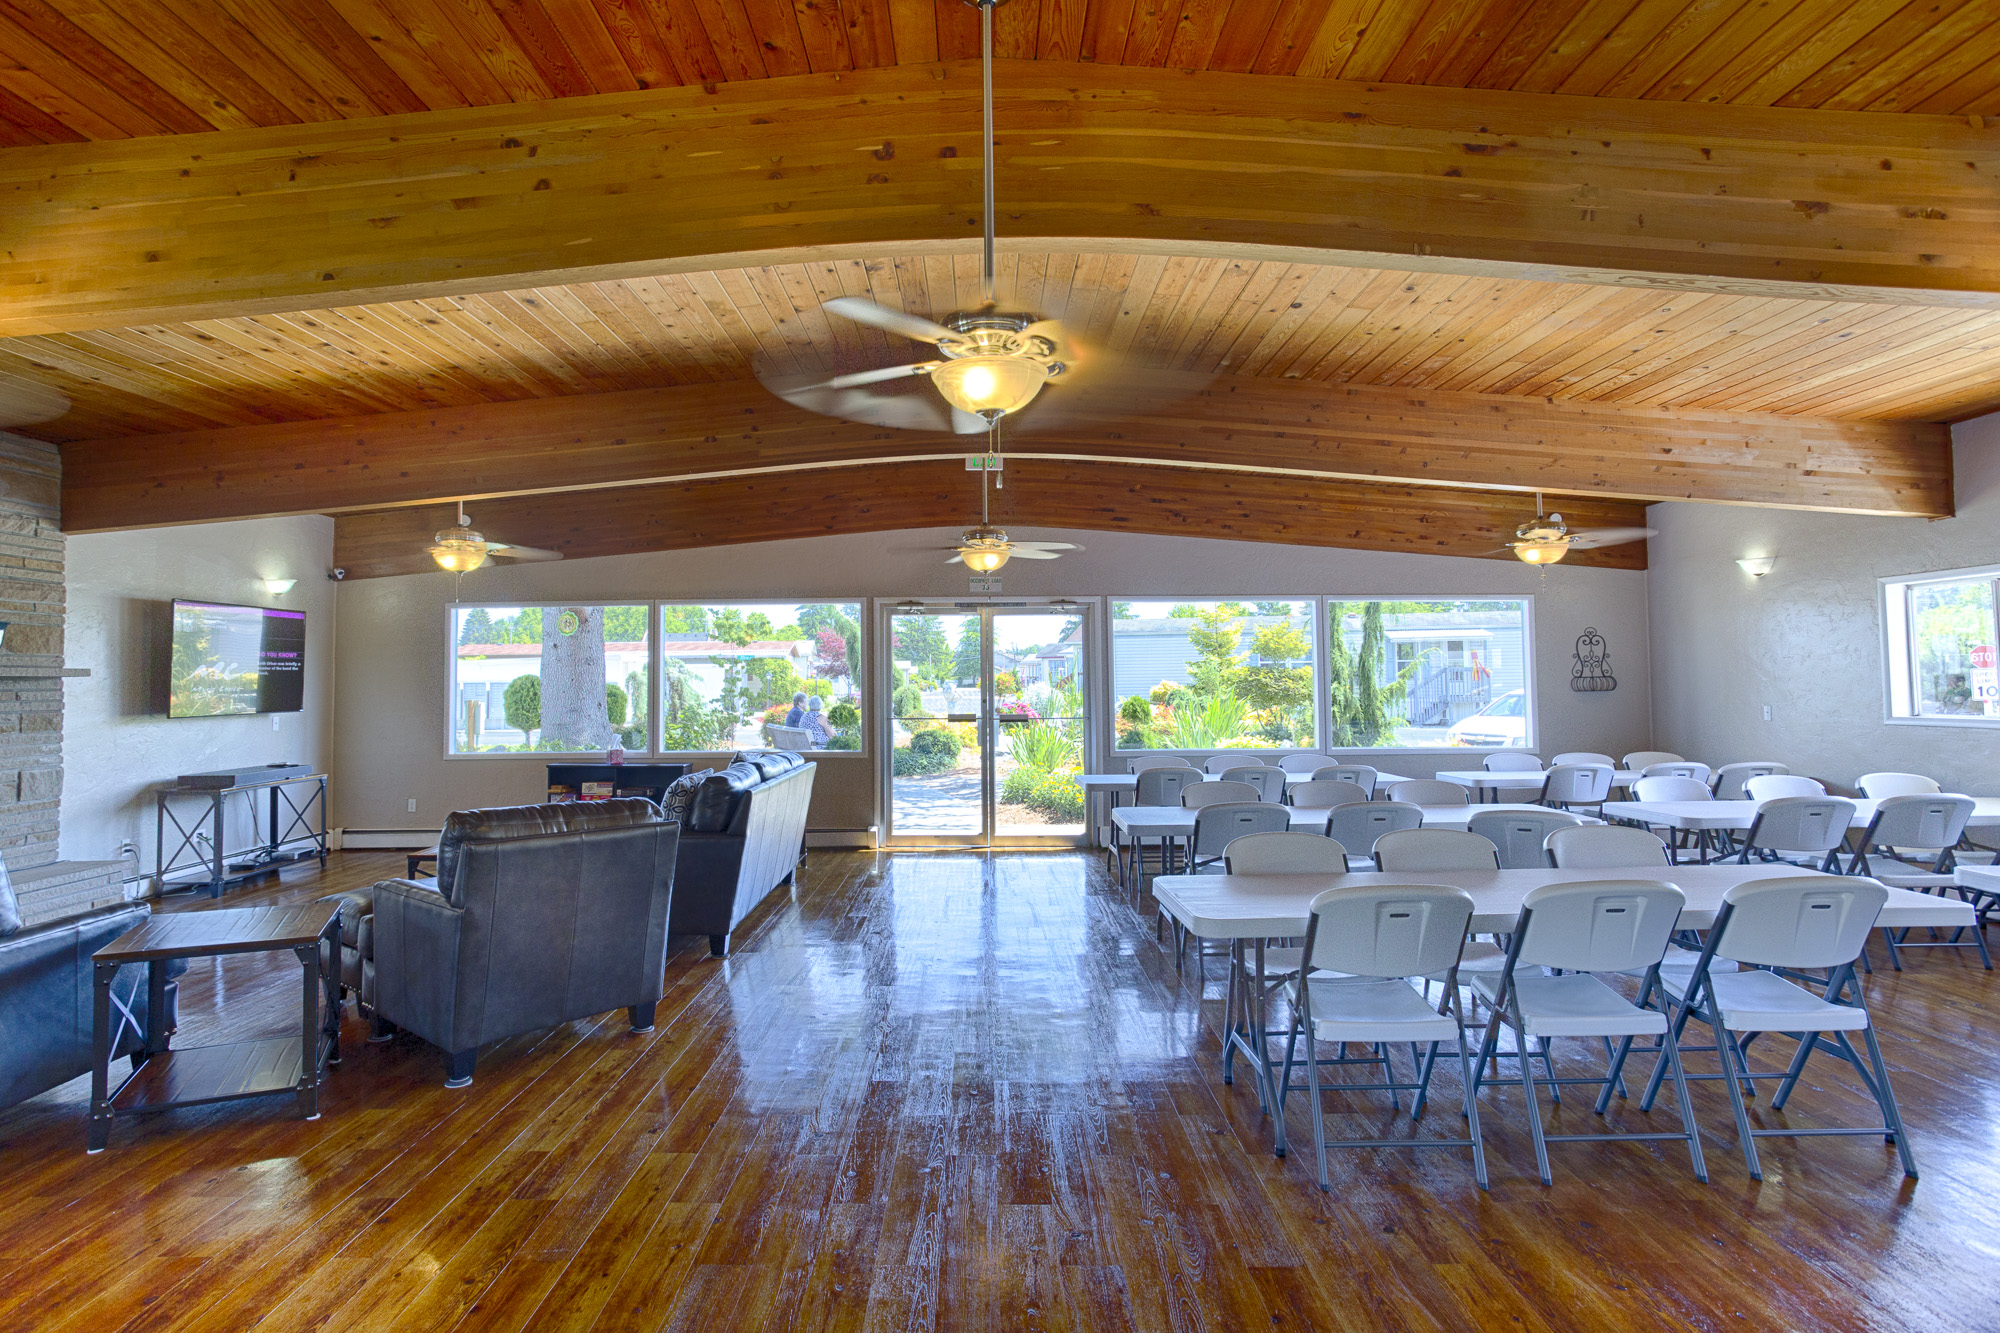 Beautiful, large, open space within the community center. Includes flat-screen TV, high vaulted ceilings, and ample seating for social gatherings. Large windows throughout provide natural light and beautiful views of the outdoors.